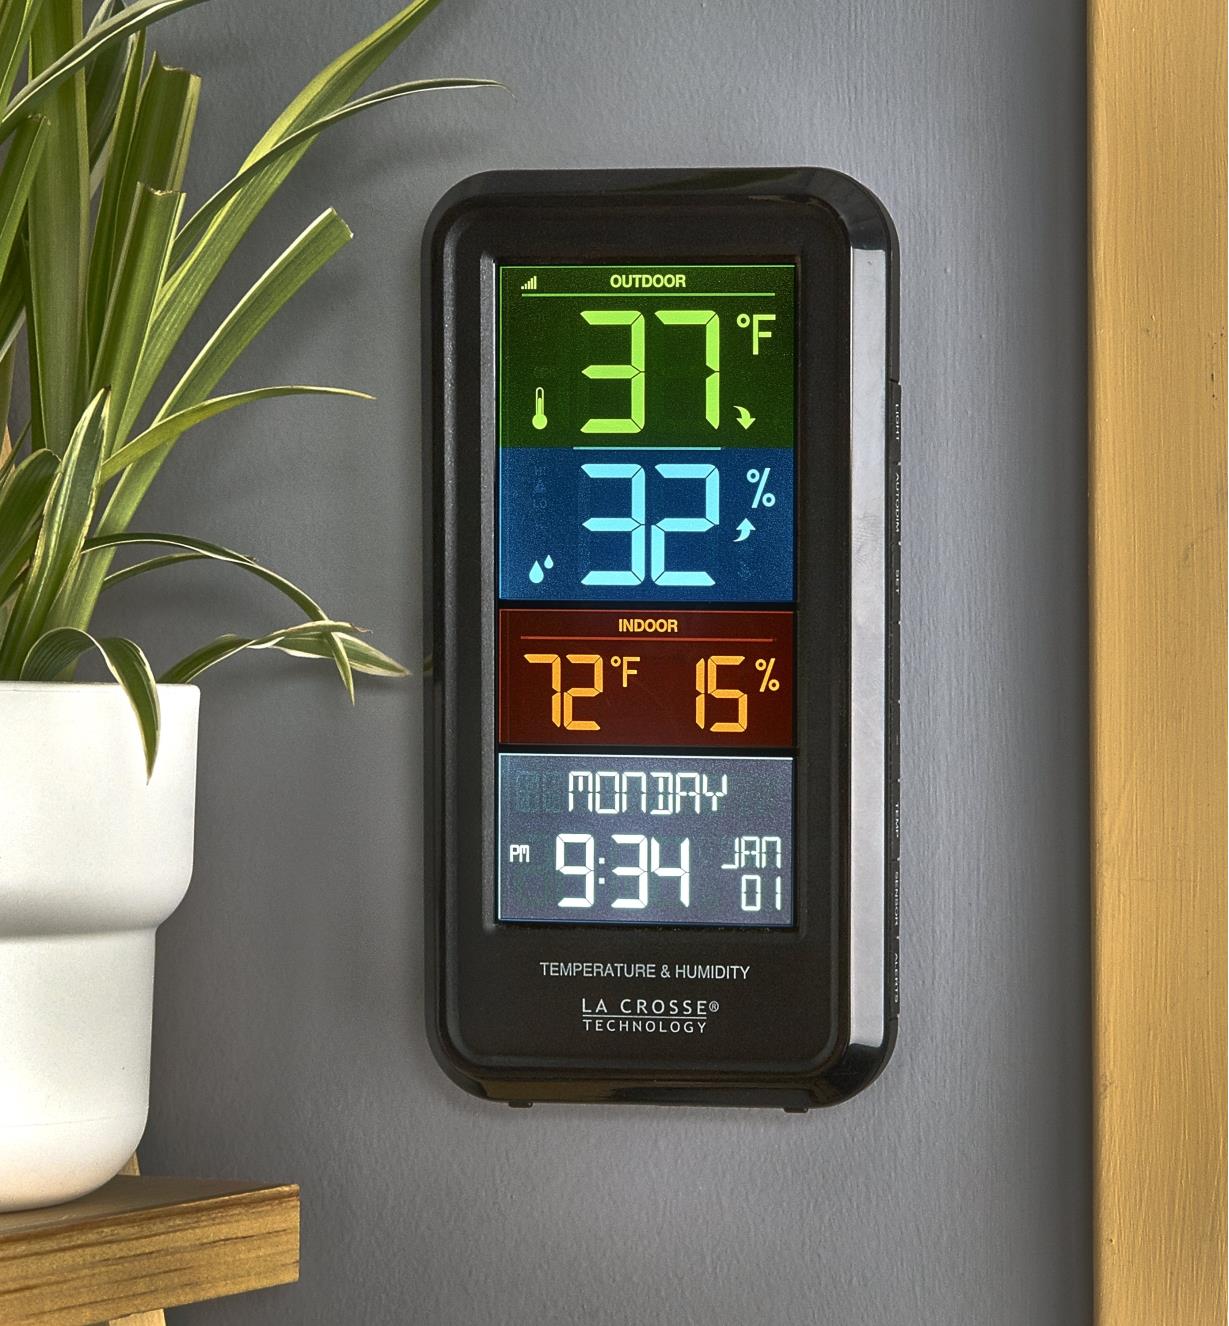 An indoor/outdoor weather station mounted on an interior wall, displaying various readings